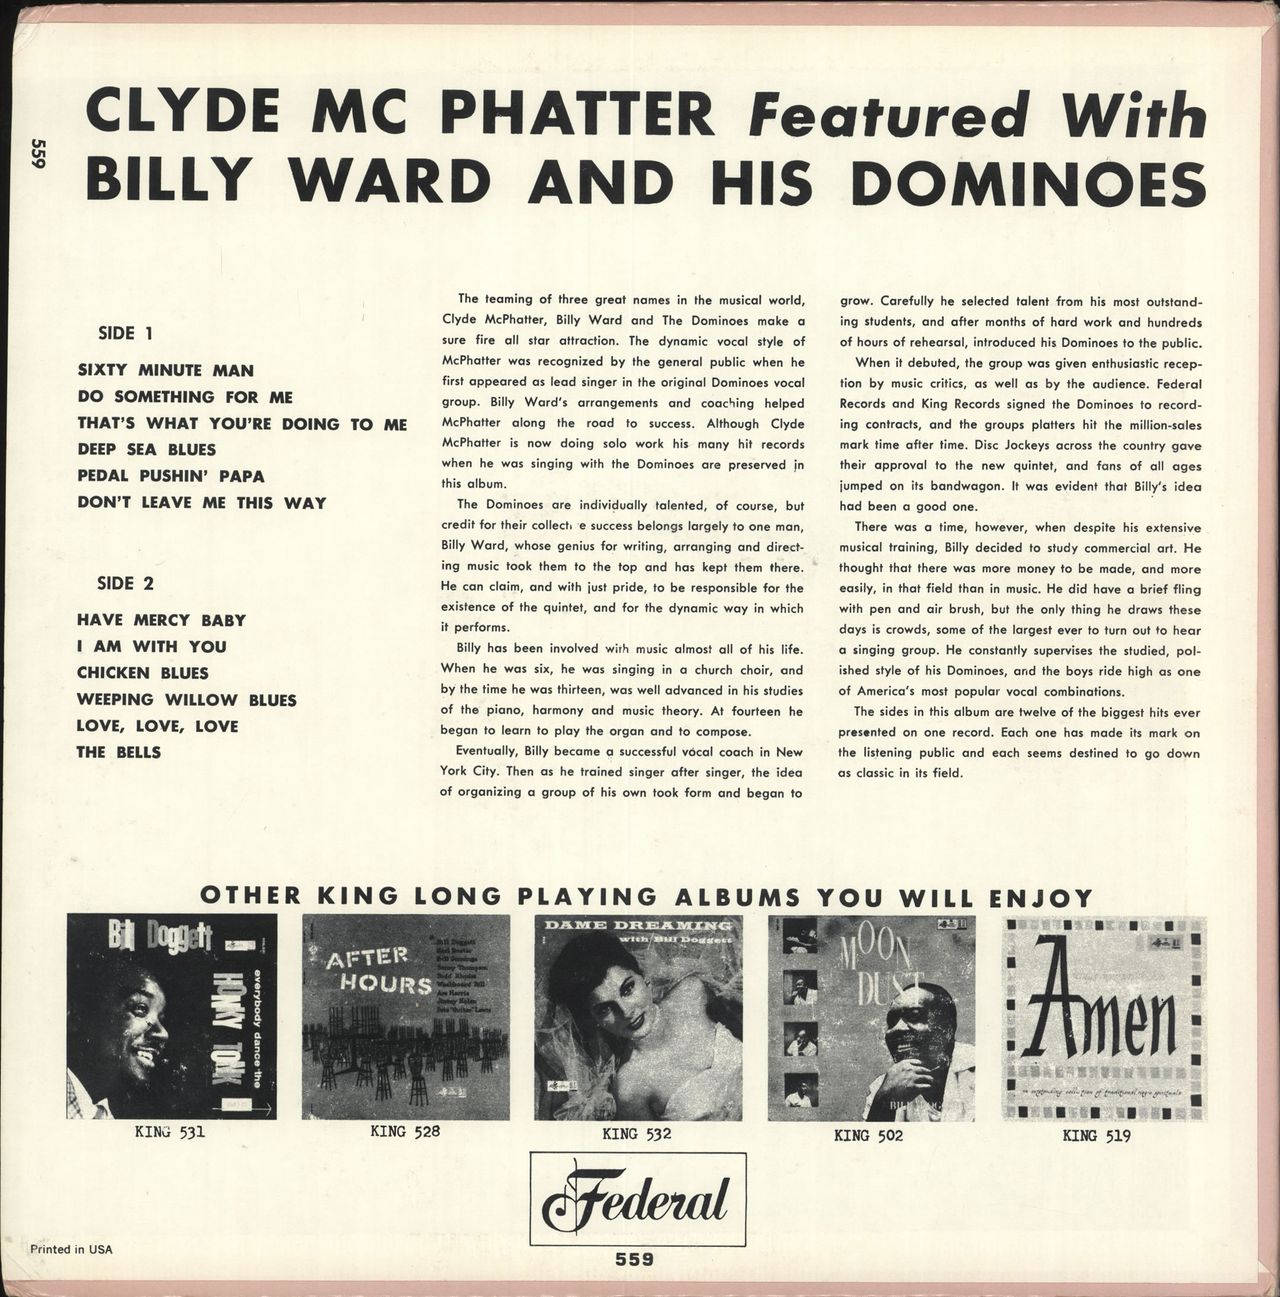 Billy Ward And The Dominoes LP Album Back Cover Tapet Wallpaper